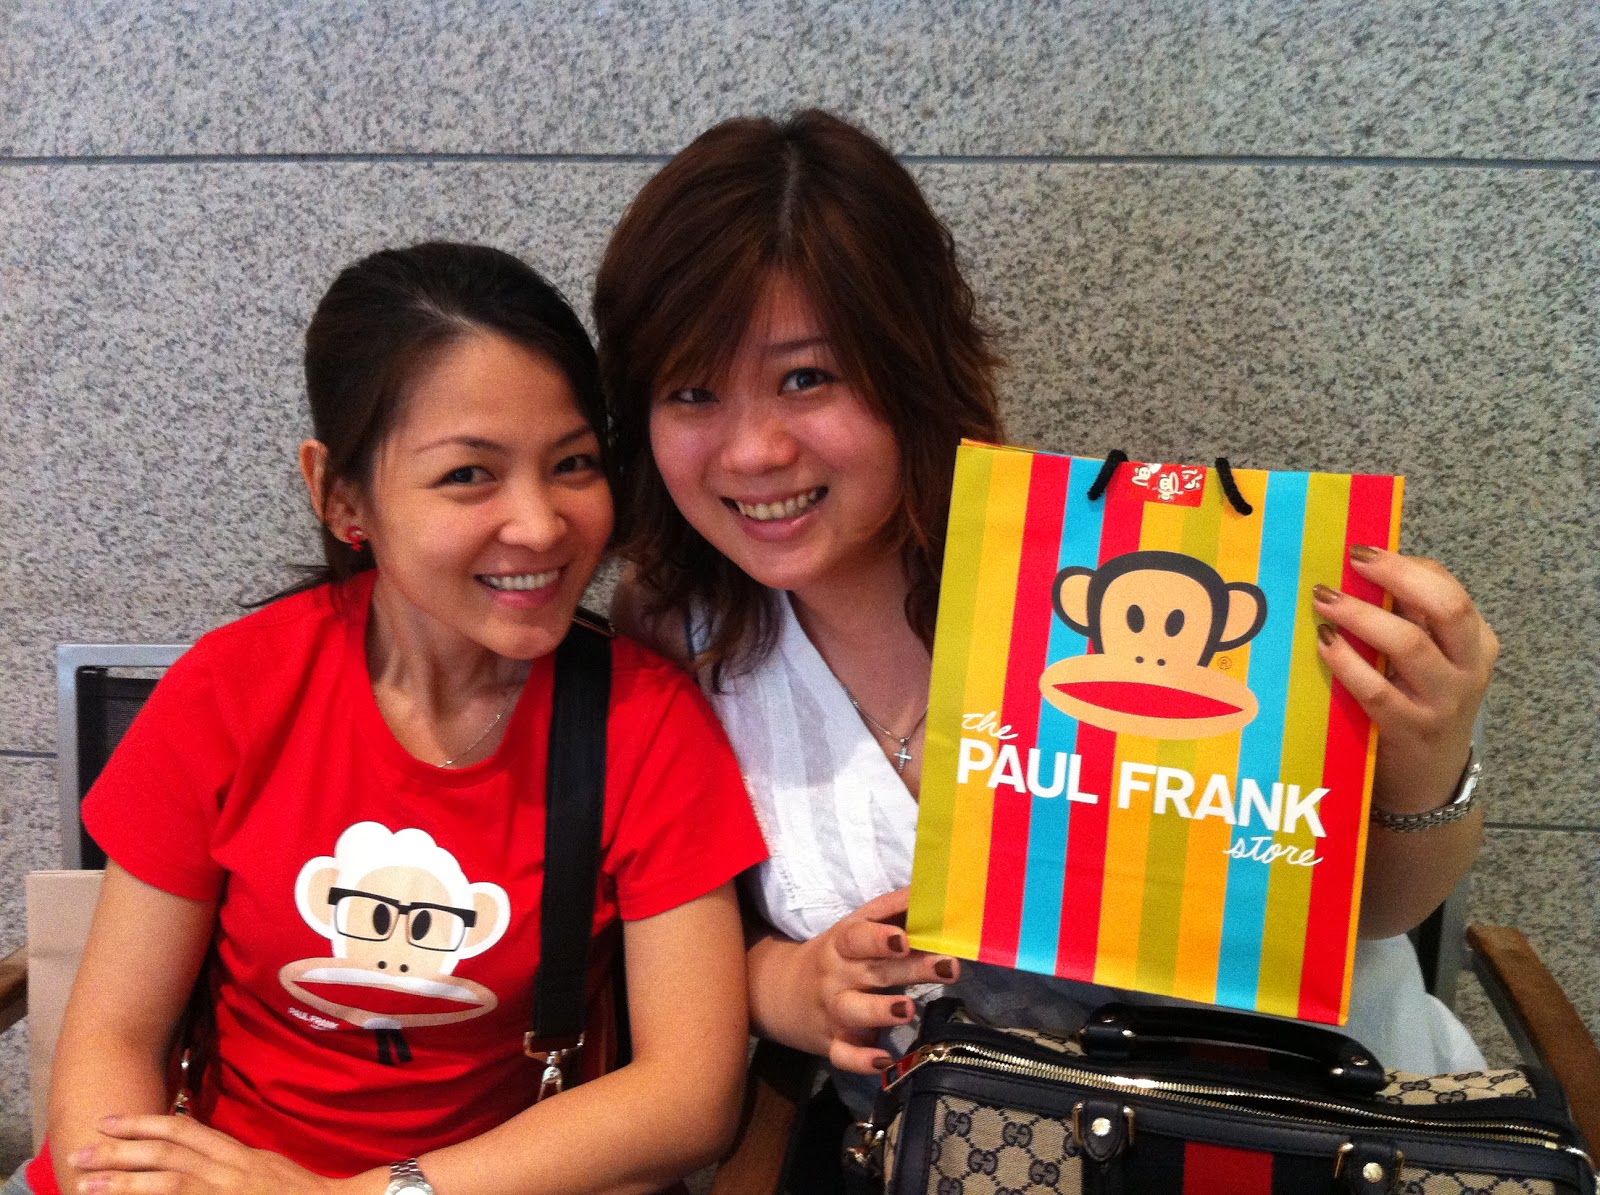  of Paul Frank! :-P Oh.. Did I mention that I was born in the year of 